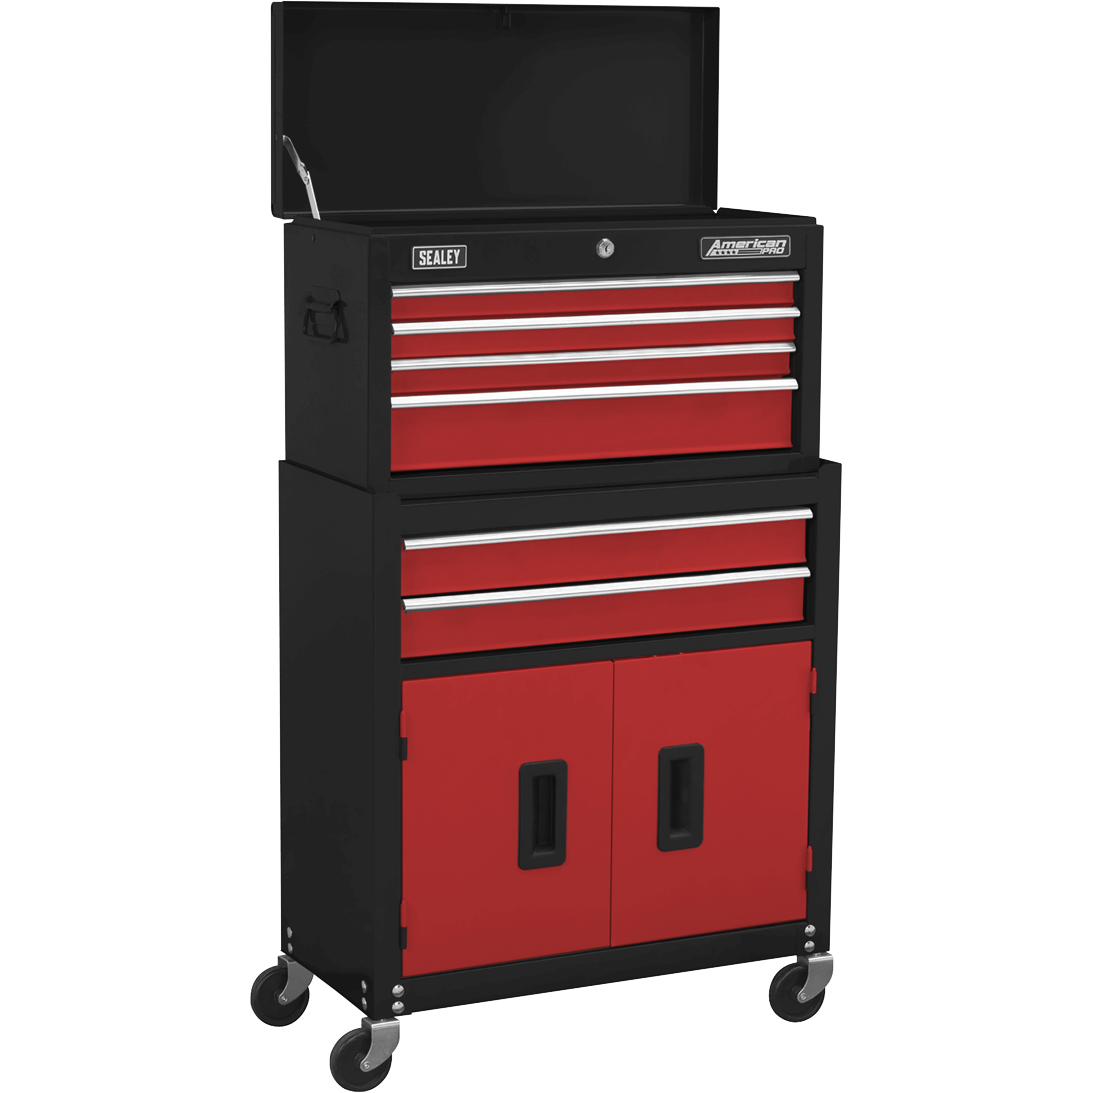 Sealey 6 Drawer Top Chest and Tool Roller Cabinet Combination Black / Red